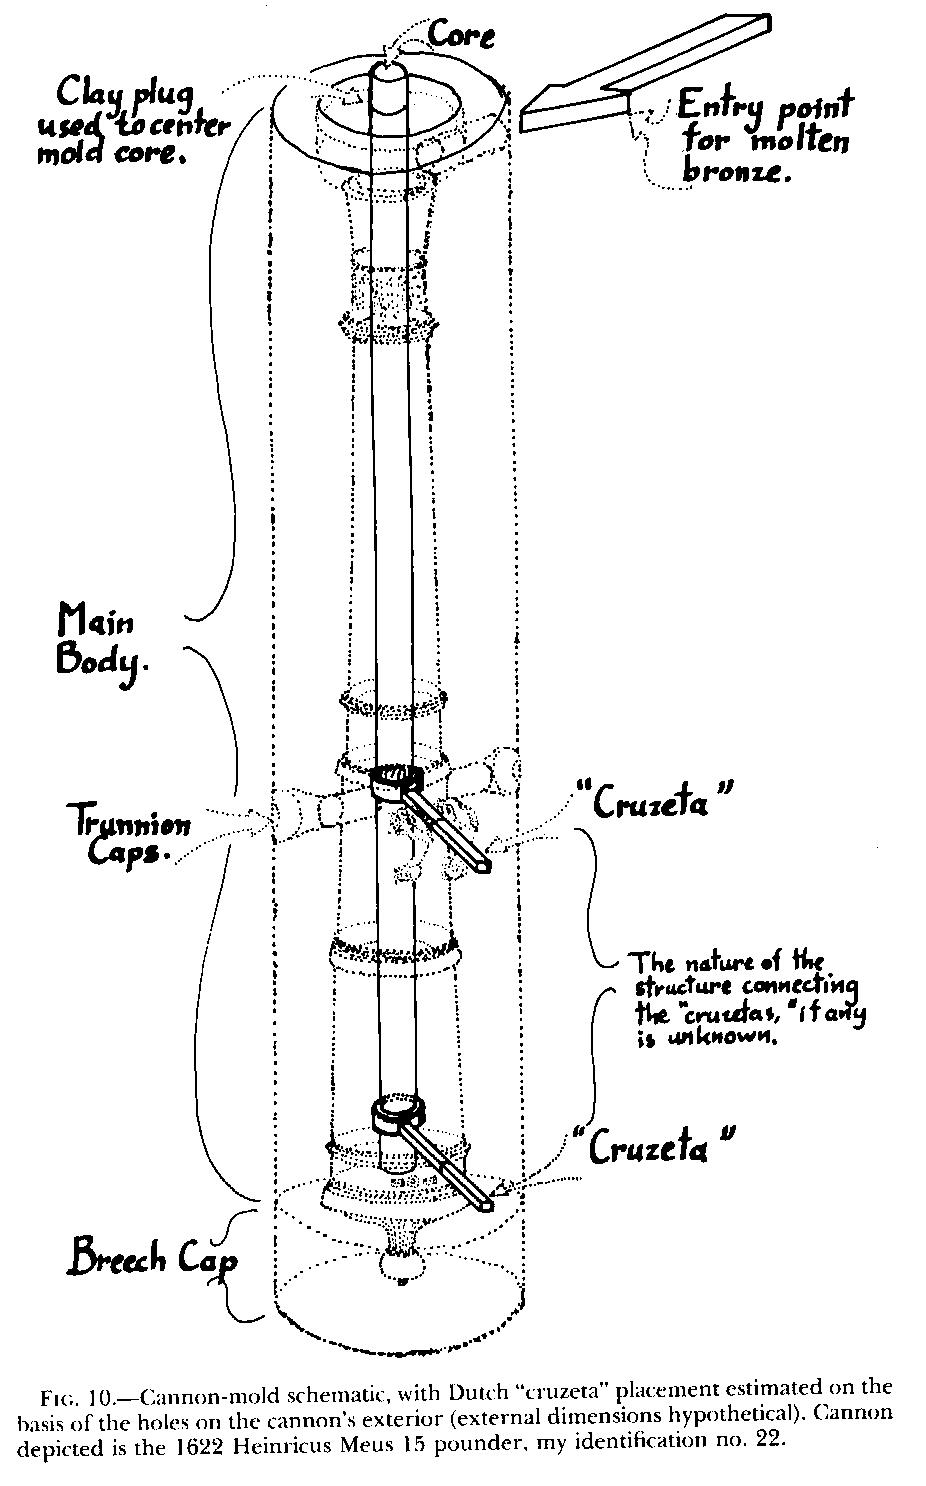 Figure 10. Cannon-mold schematic, with Dutch 